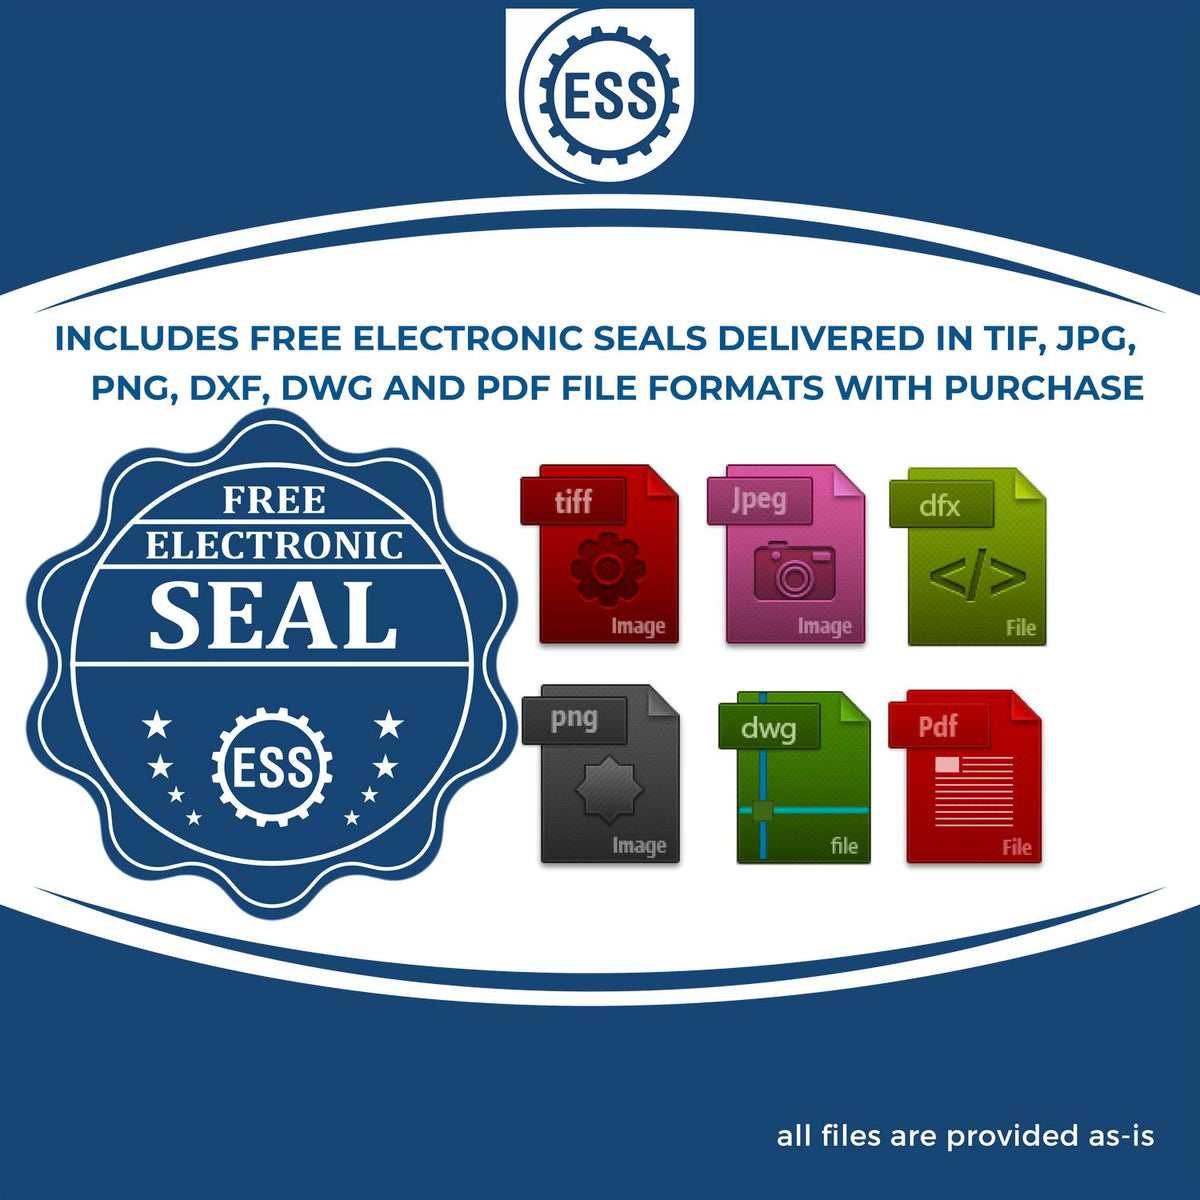 An infographic for the free electronic seal for the Slim Pre-Inked Missouri Landscape Architect Seal Stamp illustrating the different file type icons such as DXF, DWG, TIF, JPG and PNG.